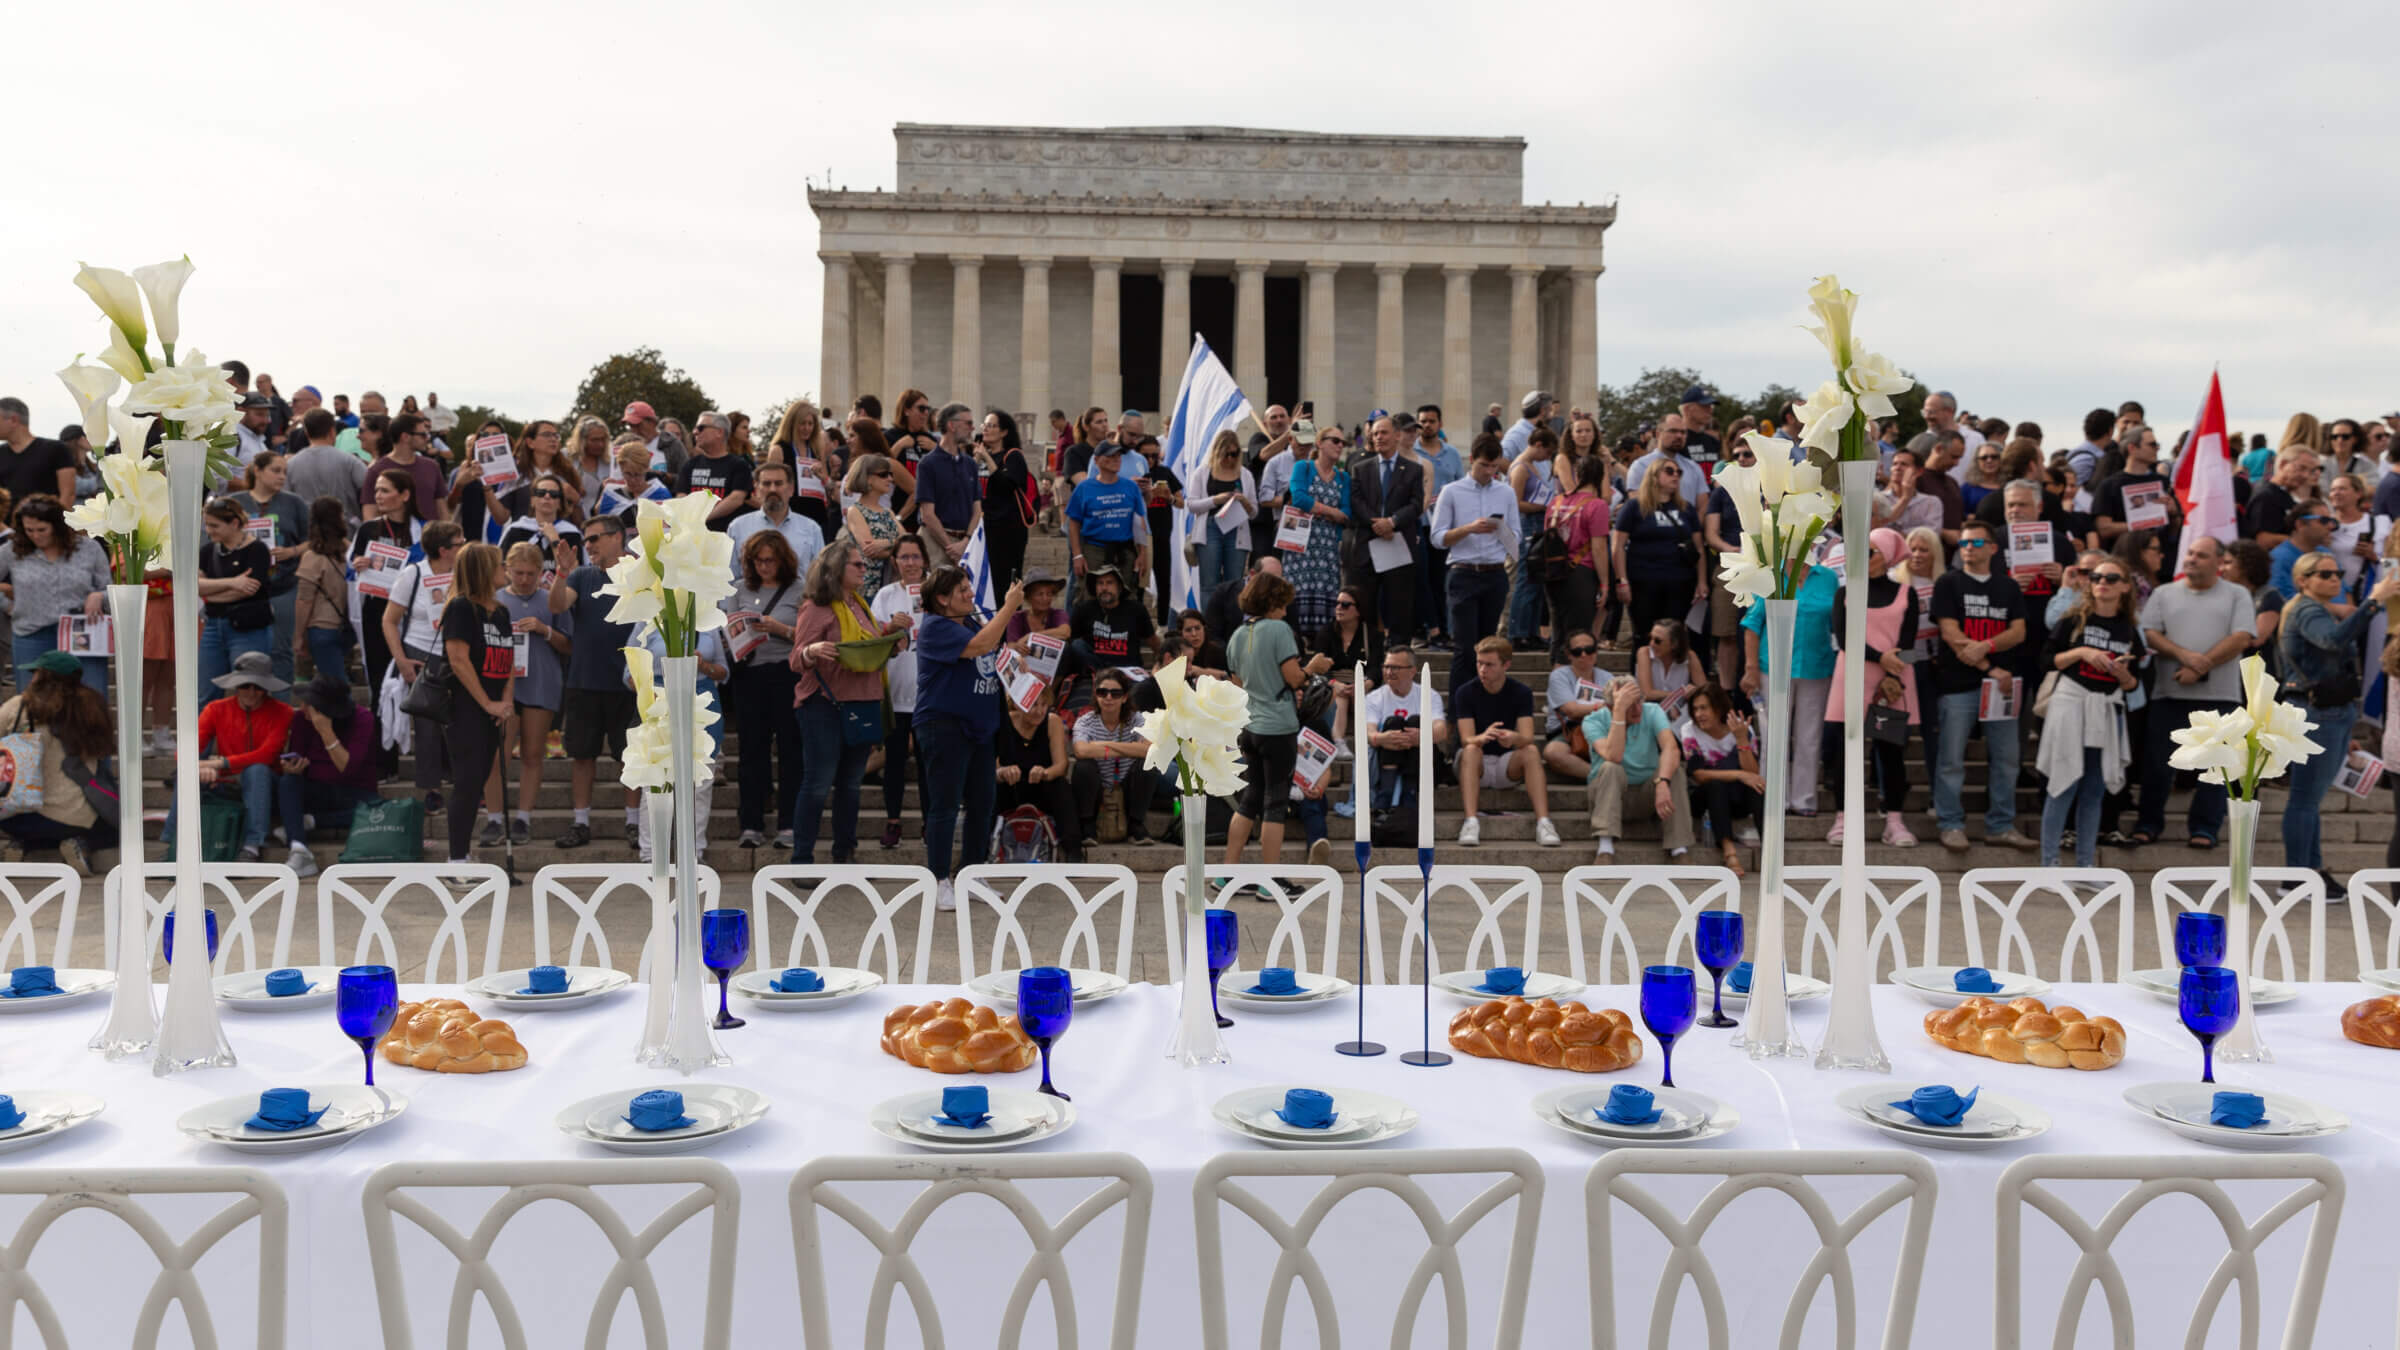 People gather on the steps of the Lincoln Memorial in front of a Shabbat table set for the hostages being held in Gaza. The Jewish community has poured significant energy into freeing the hostages, although some experts say these efforts don't always have a strategic focus.